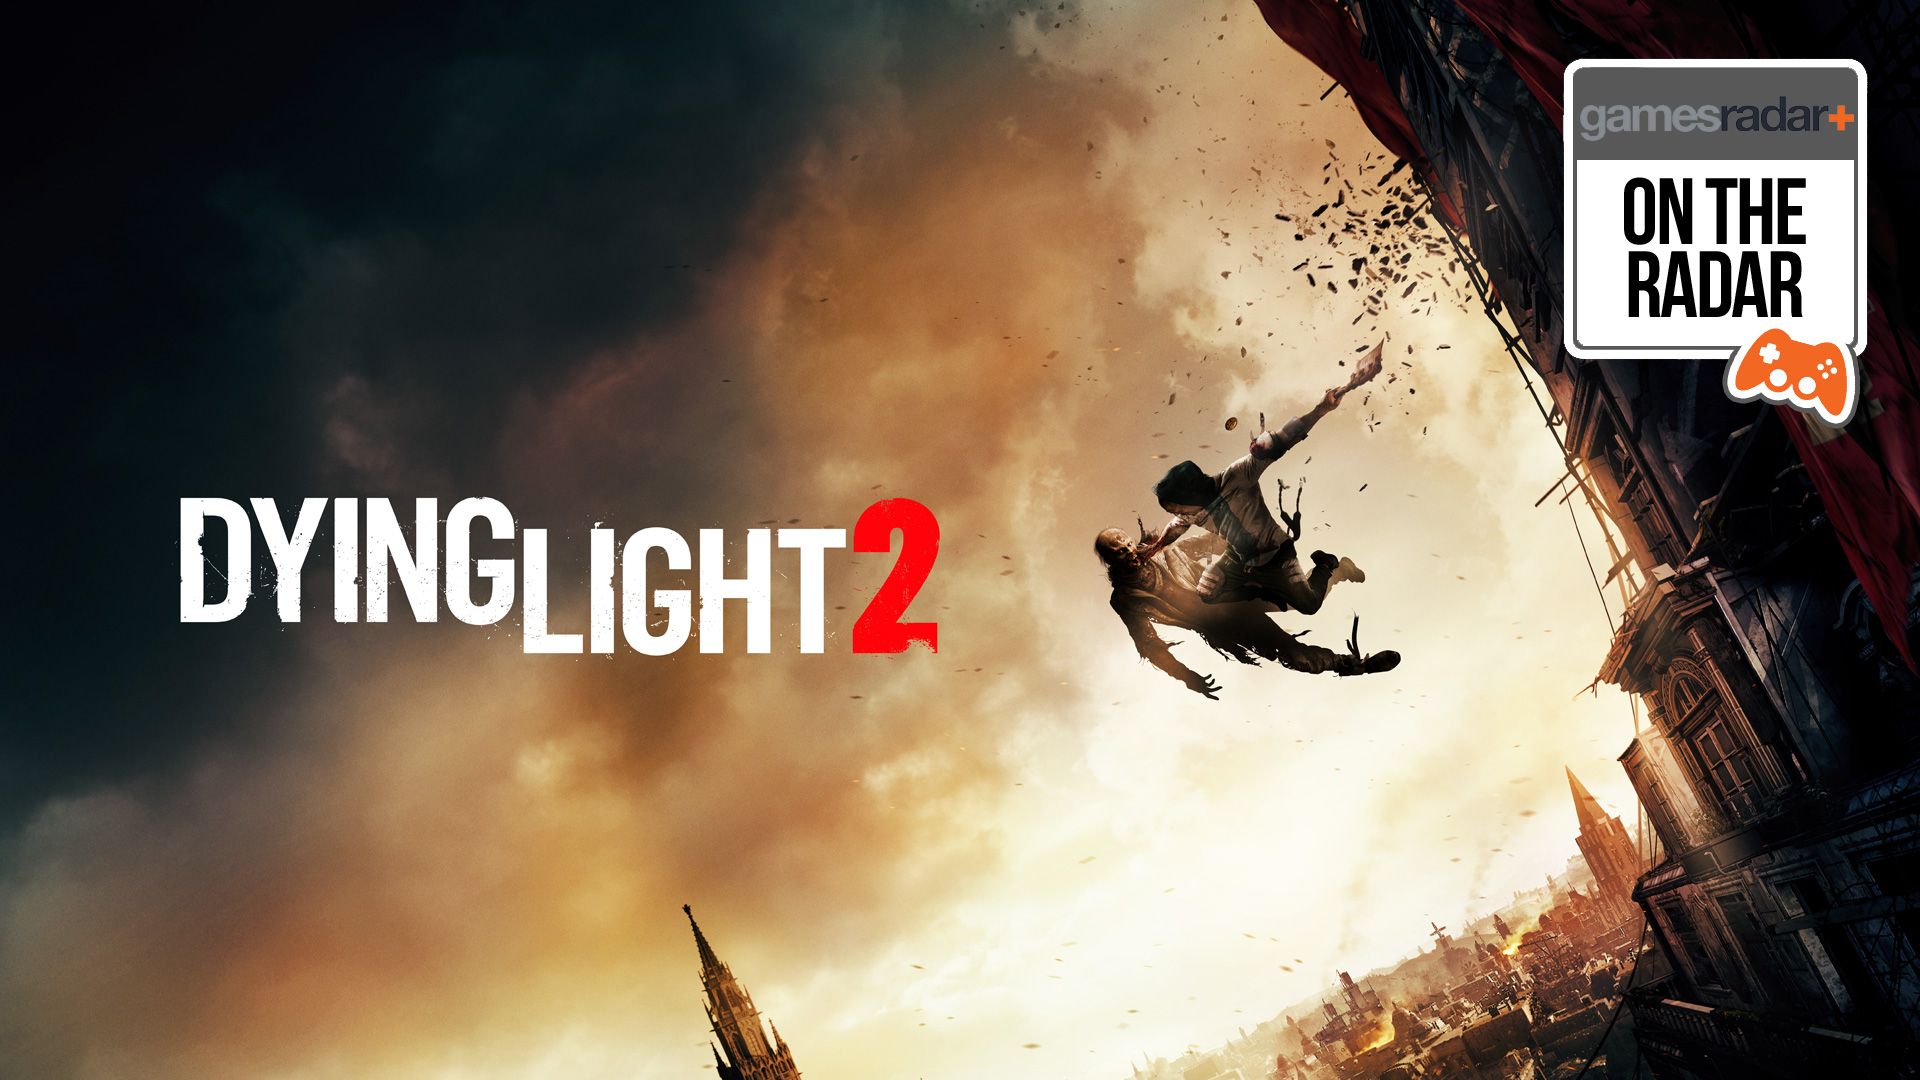 Dying Light 2 is the first game of its type